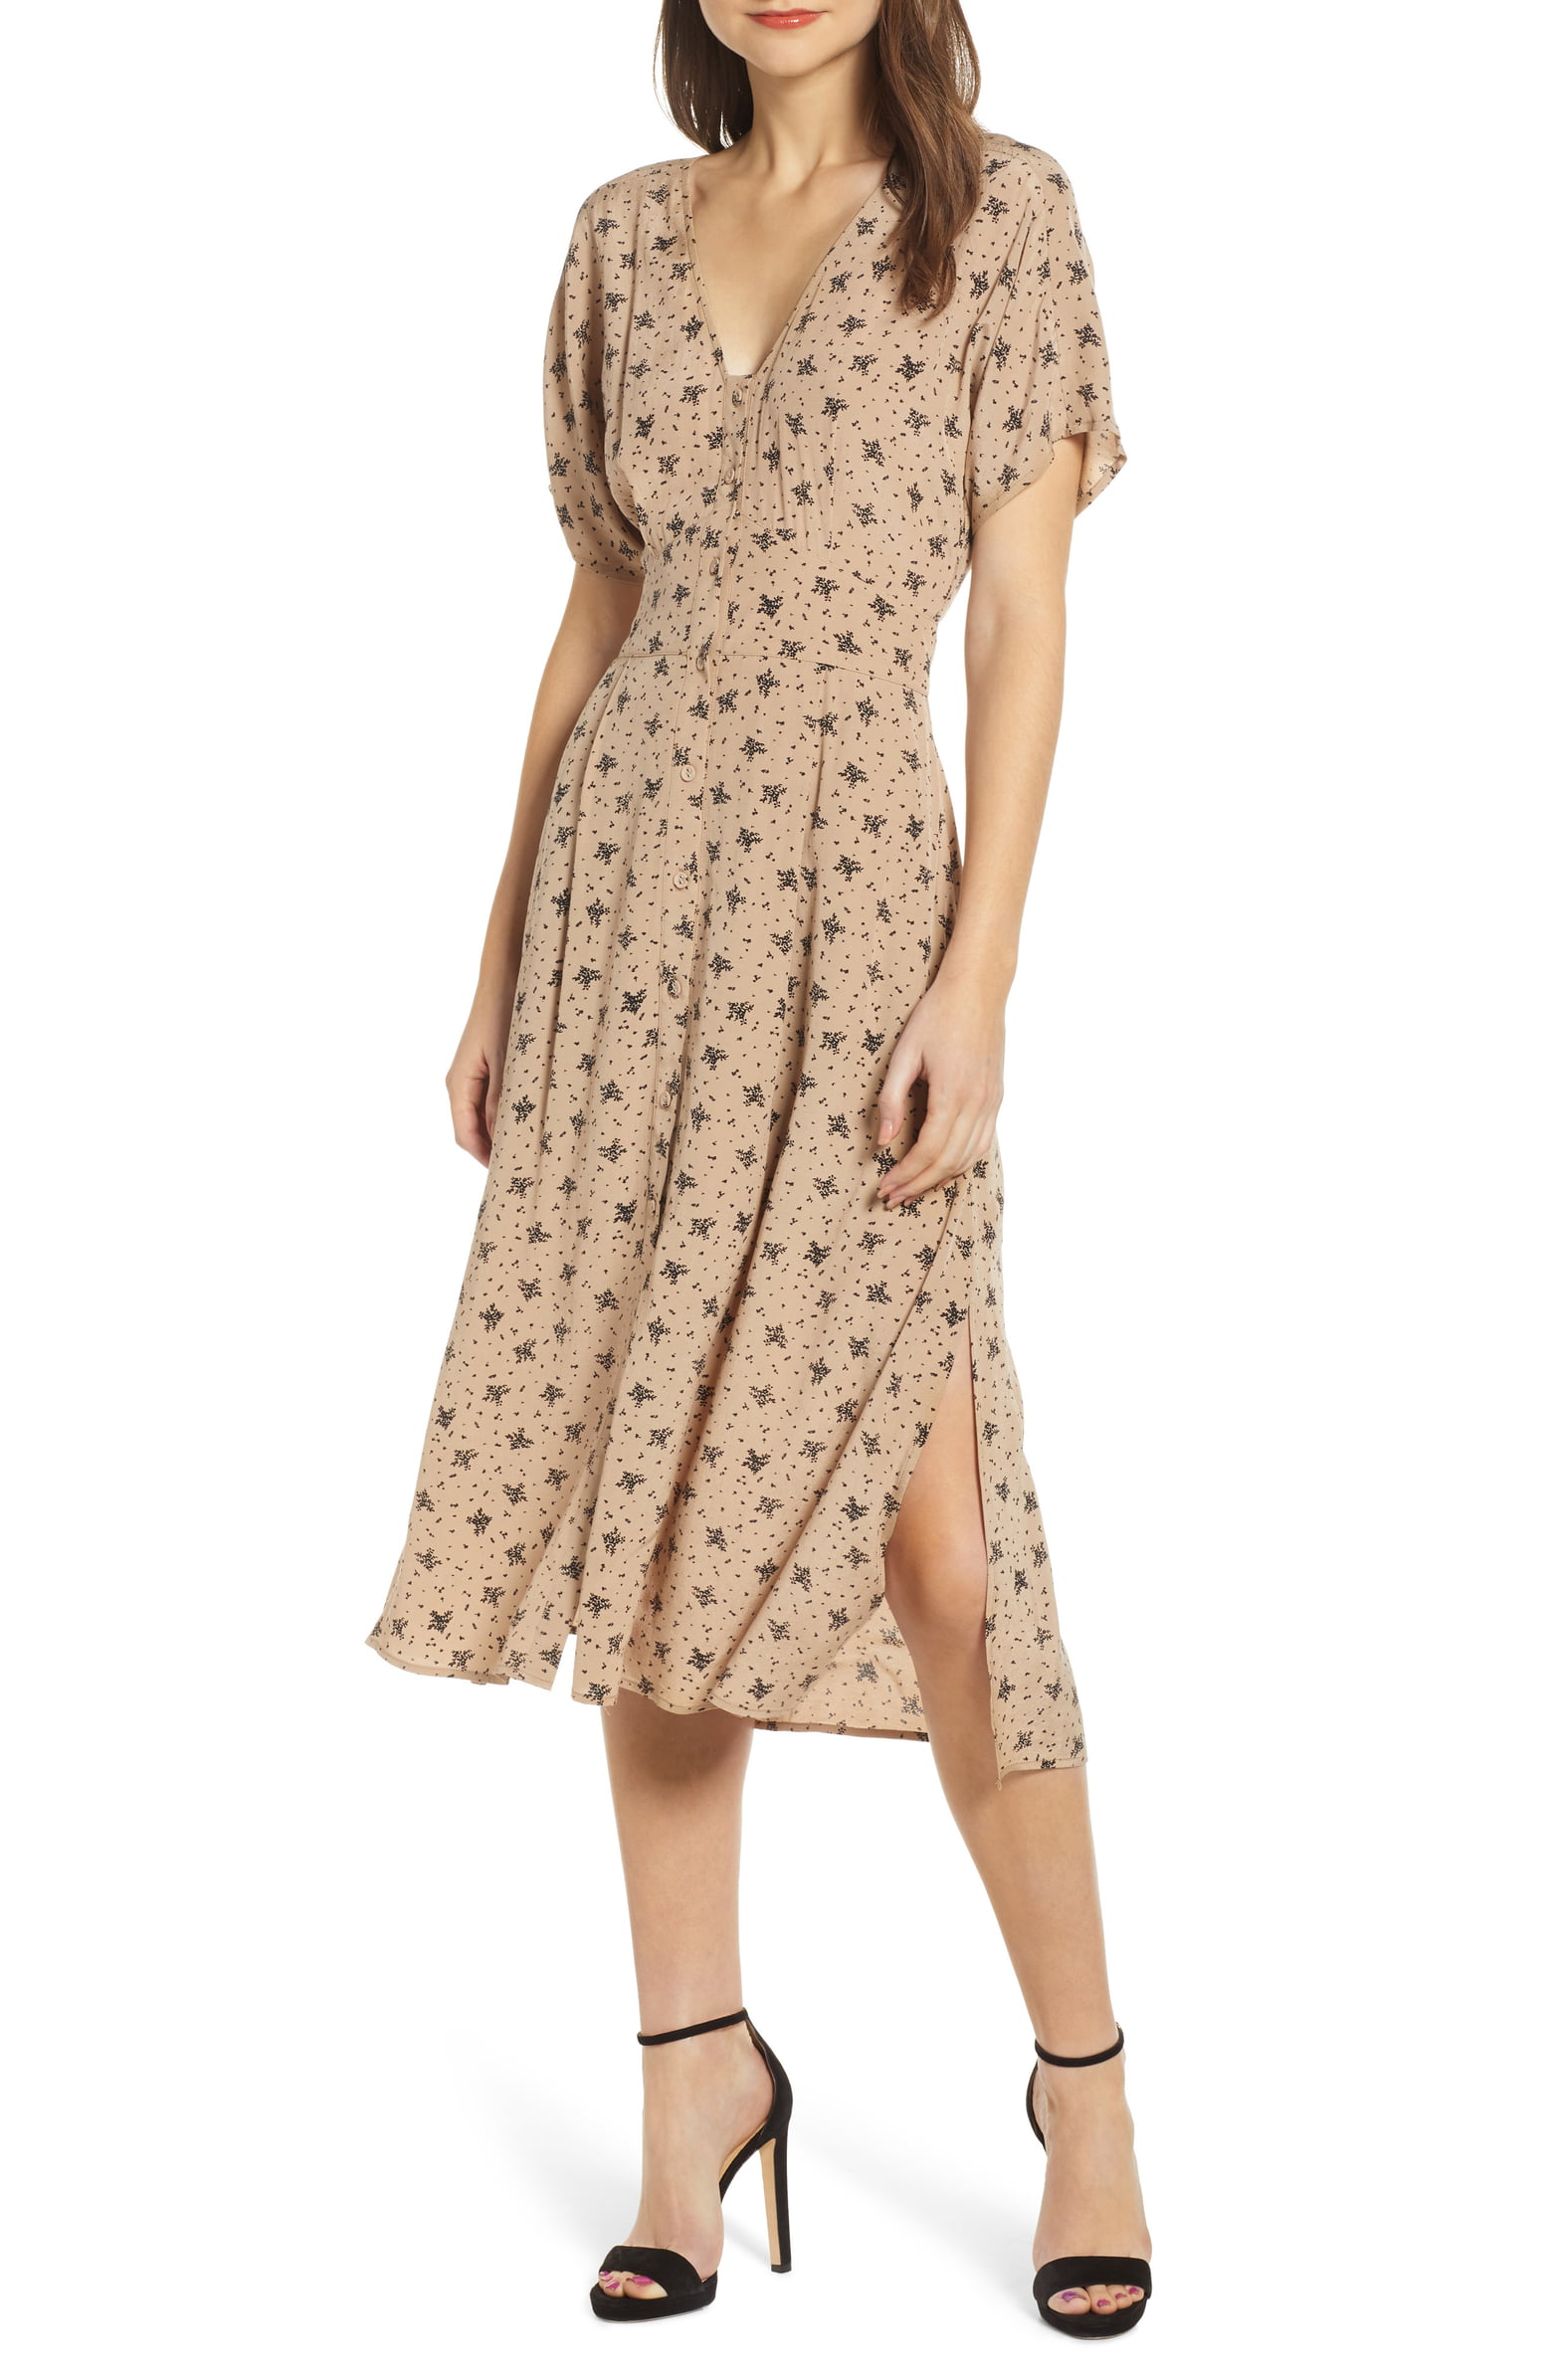 The 17 Best Summer Dresses for Work | Who What Wear